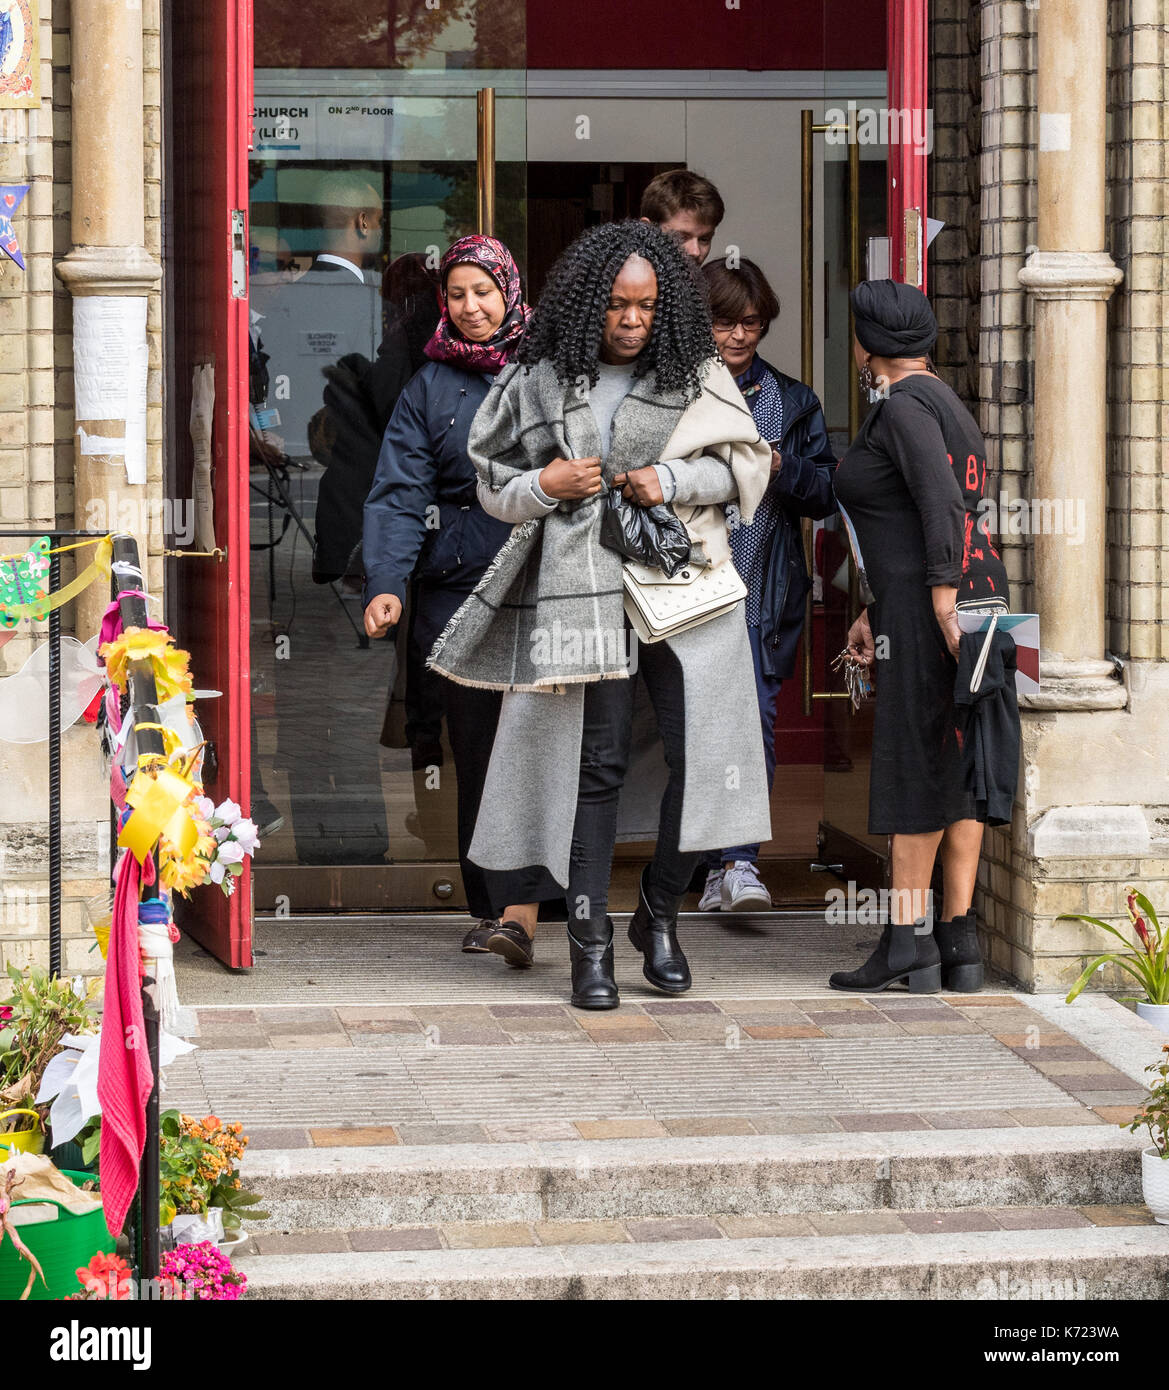 Kensington, London, UK. 14th Sep, 2017. Notting Hill Methodist Church was used for a live video feed from the Grenfell Tower inquiry and was attended by survivors and local residents who expressed a lack of confidence in the process. Several complained they had yet to be rehoused or compensated for their loss. Survivors leave the overflow inquiry Credit: Ian Davidson/Alamy Live News Stock Photo